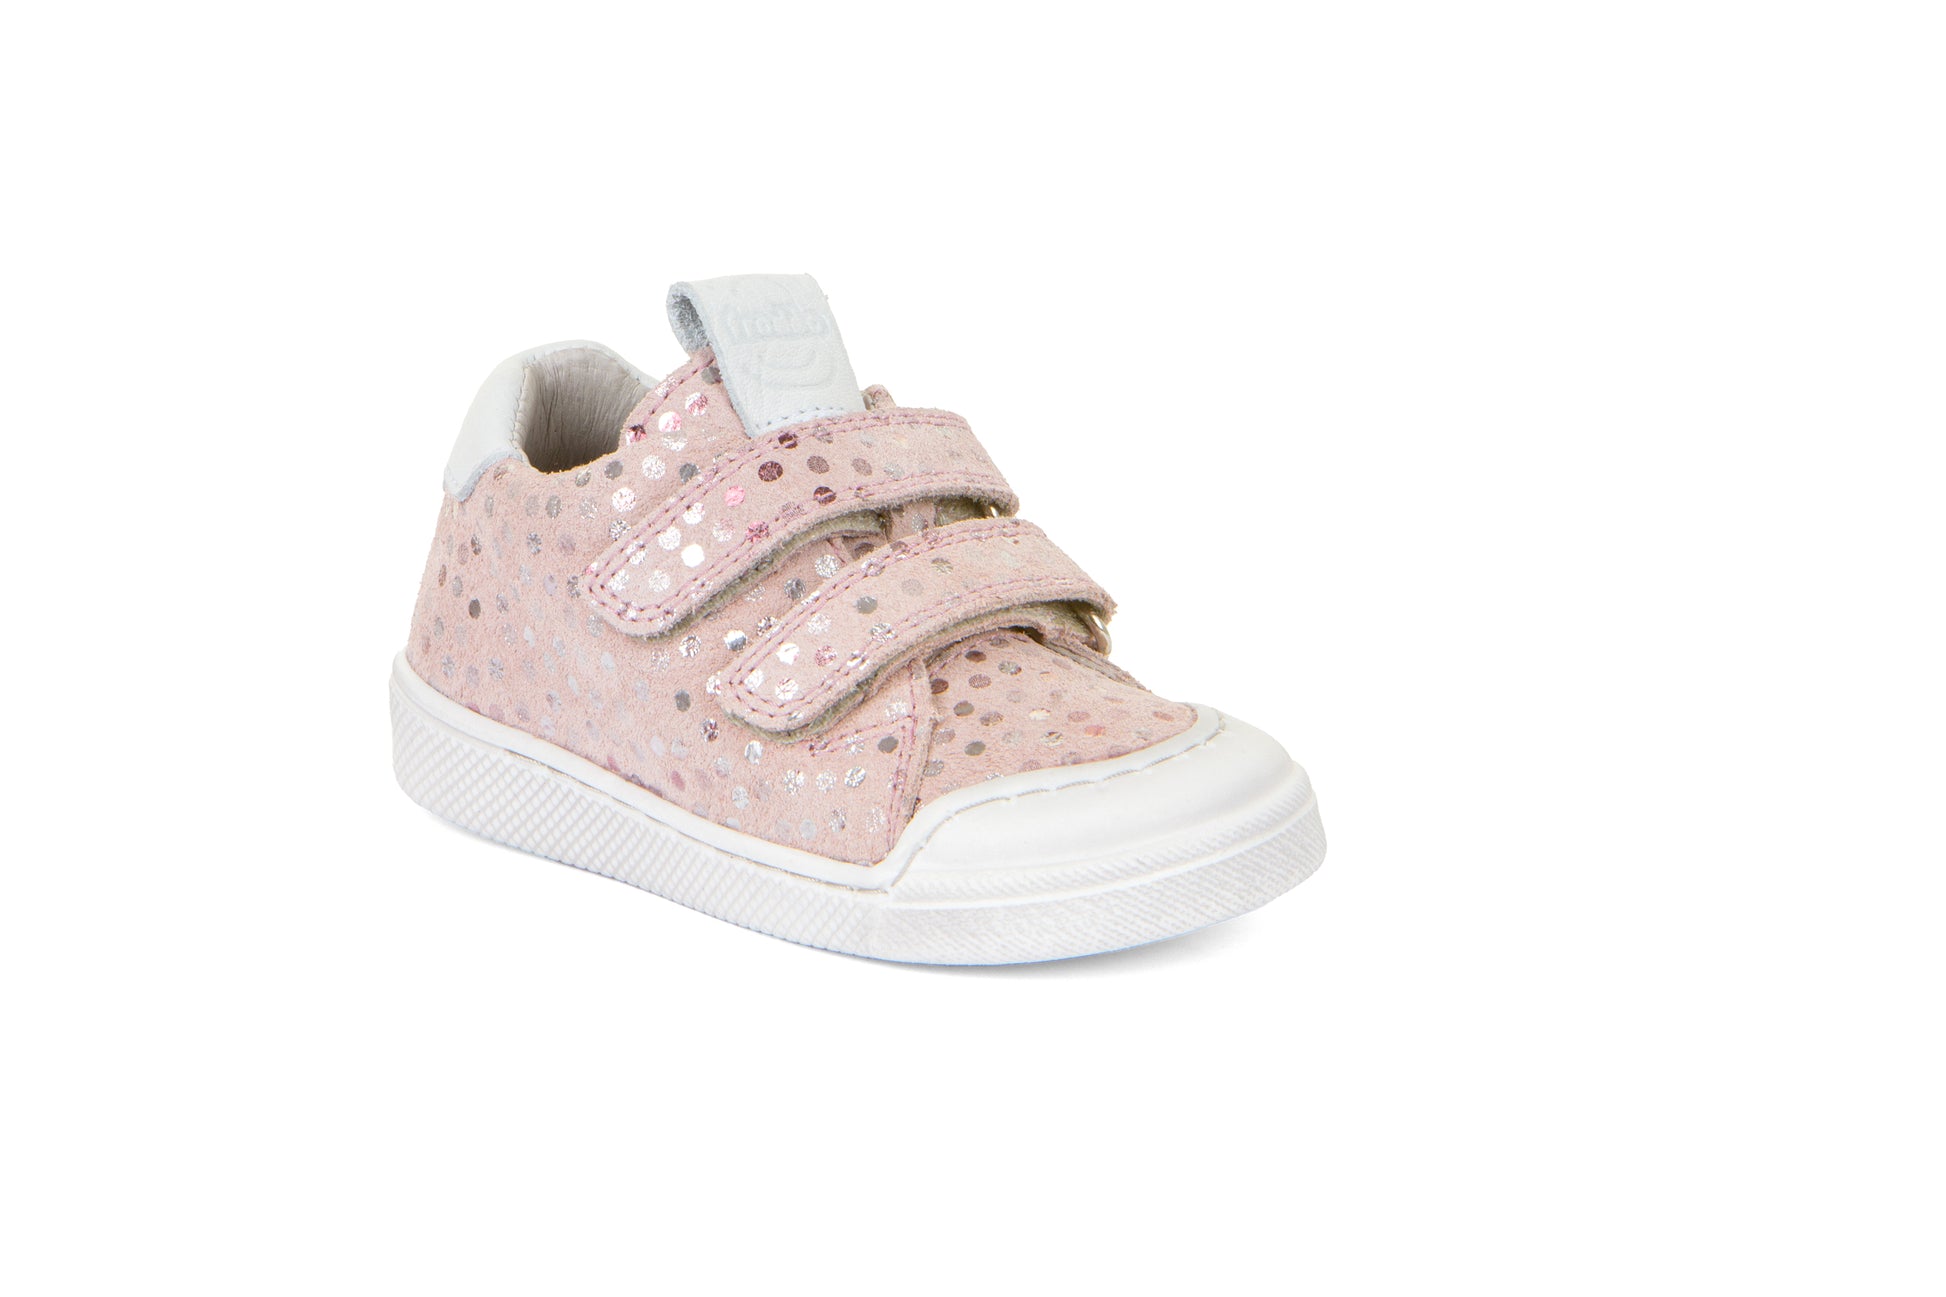 A girls casual shoe by Froddo, style Rosario G2130316-10, in pink/silver spot suede with white trim and toe bumper. Velcro fastening. Angled view.